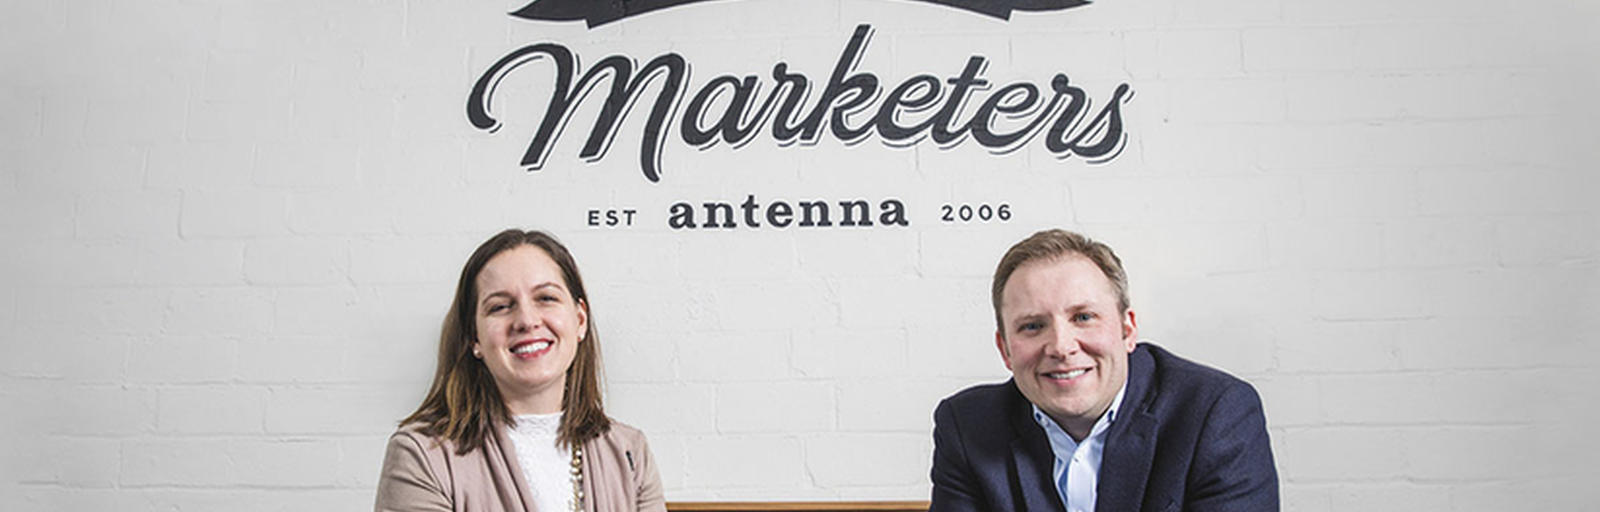 Brendon Schrader, ’01 MBA, founded Antenna in 2006, while Jennifer Laible, ’98 BSB, ’02 MBA, joined the firm in 2012.